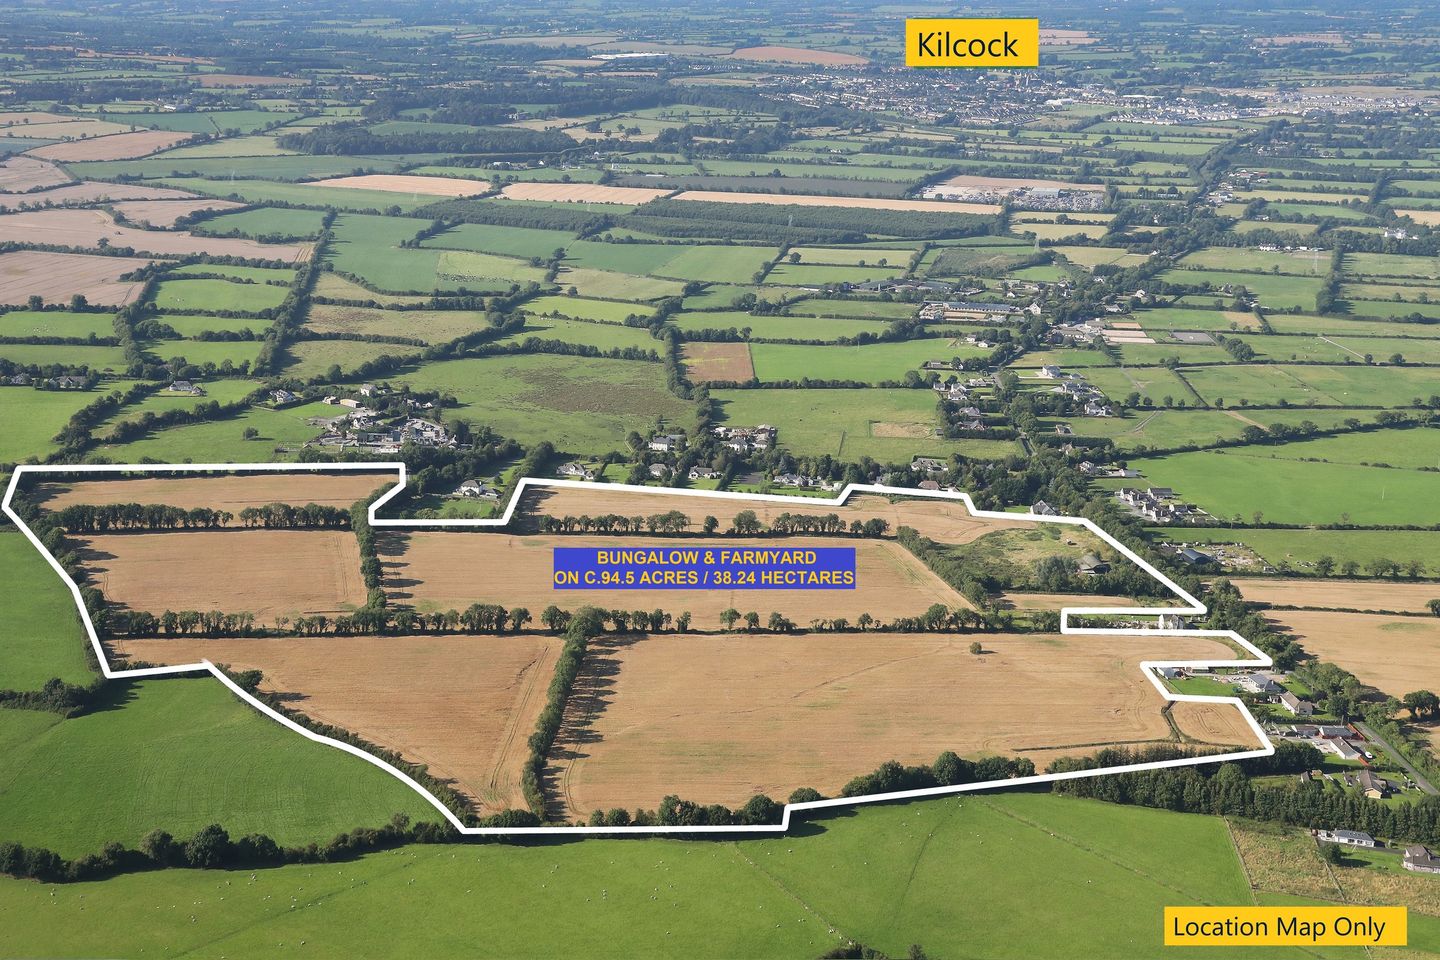 Land c.94.5 Acres Clonfert South, Maynooth, Co. Kildare